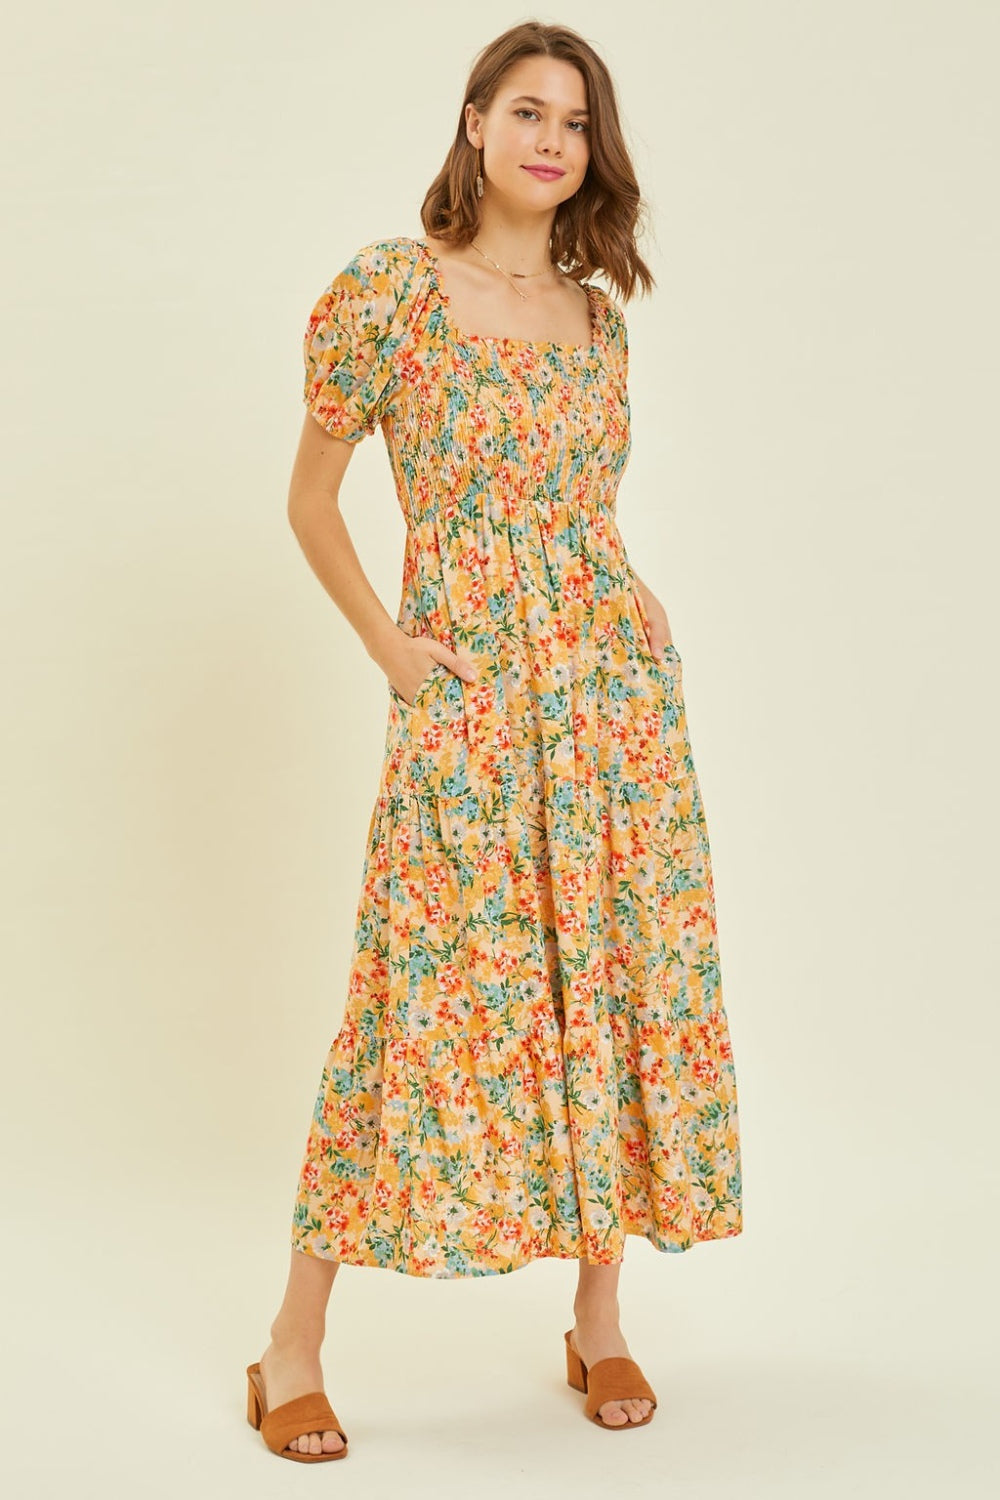 HEYSON Full Size Floral Smocked Tiered Midi Dress - Gem of Summer Collection